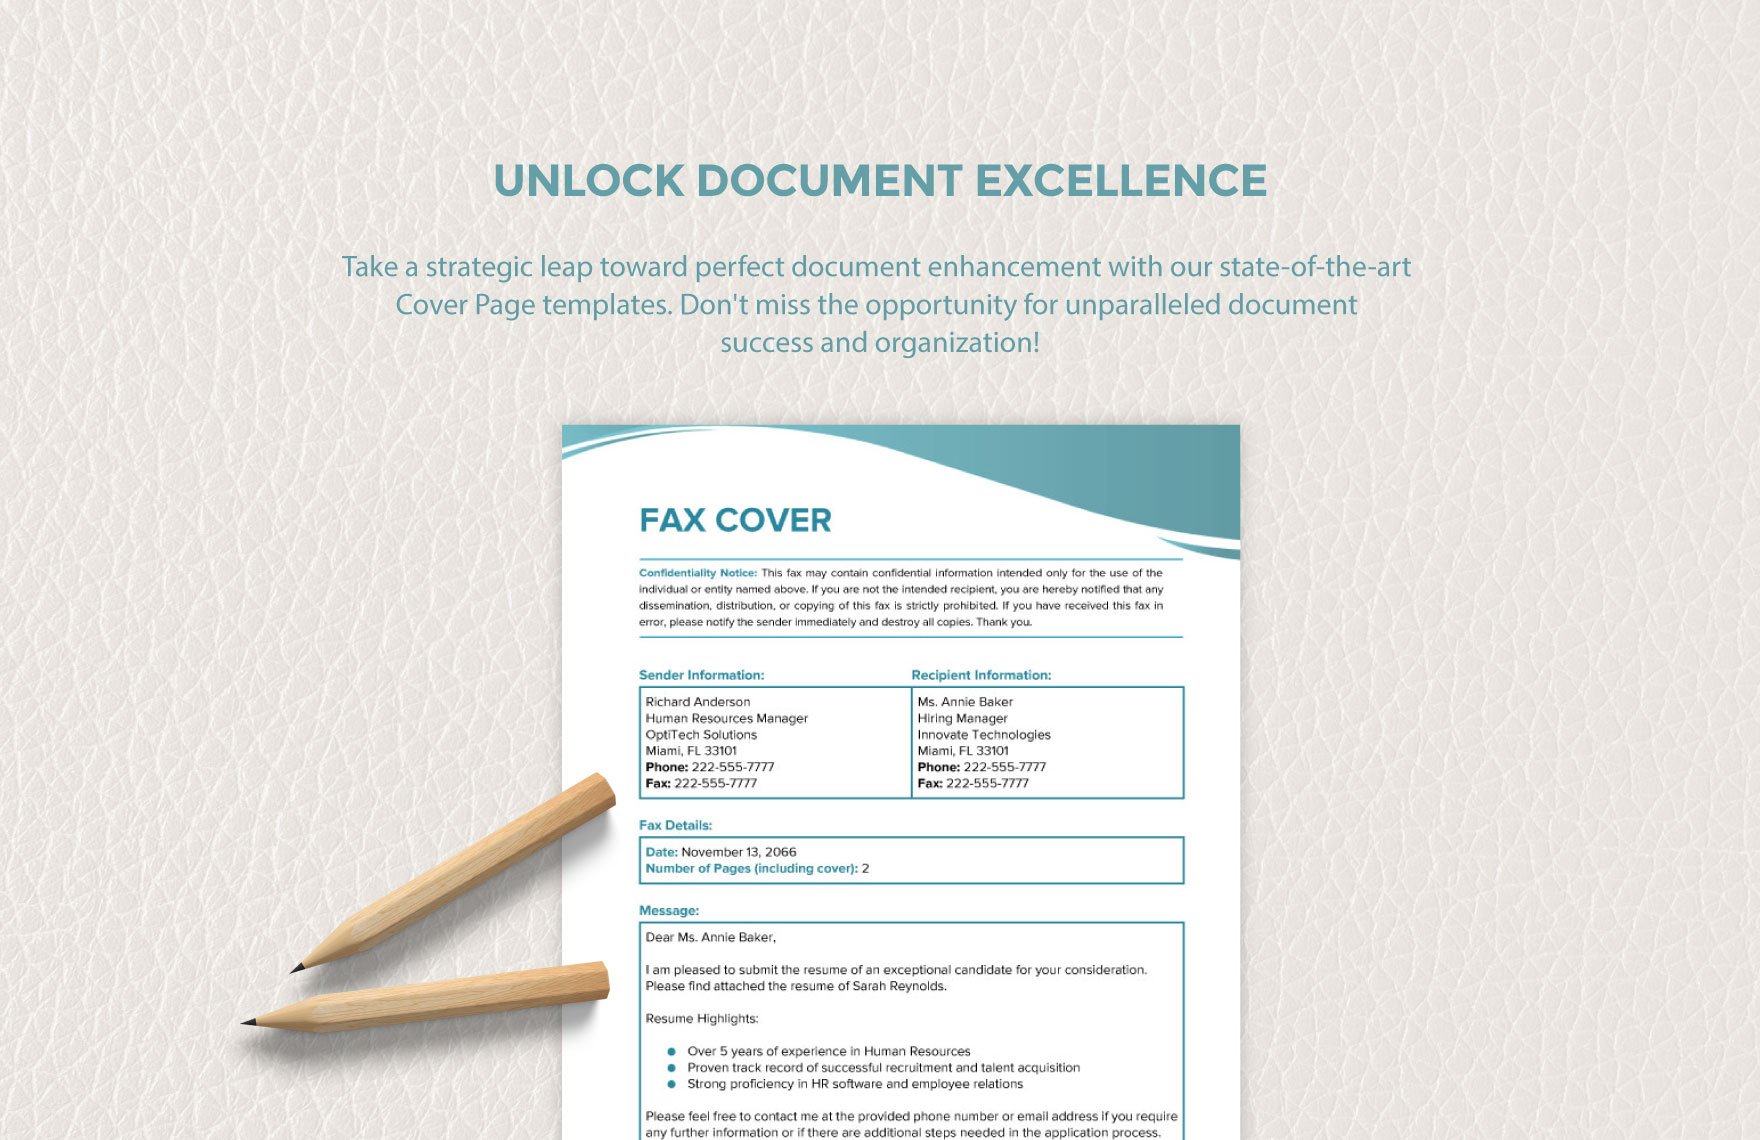 Resume Fax Cover Template